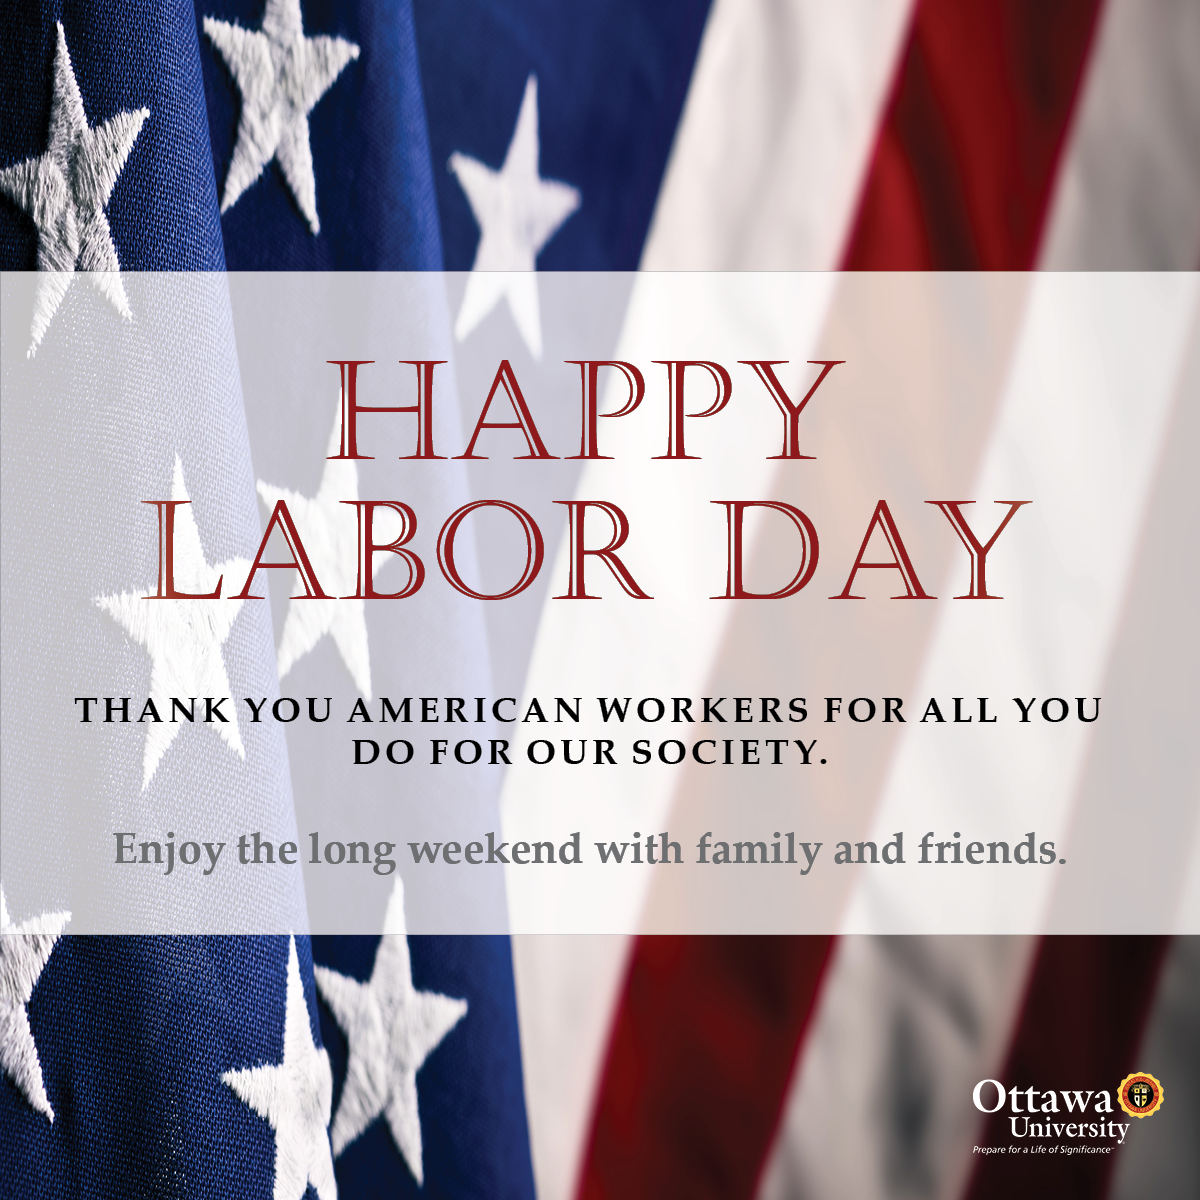 Happy Labor Day from Ottawa University. Thank you American workers for all you do for our society!